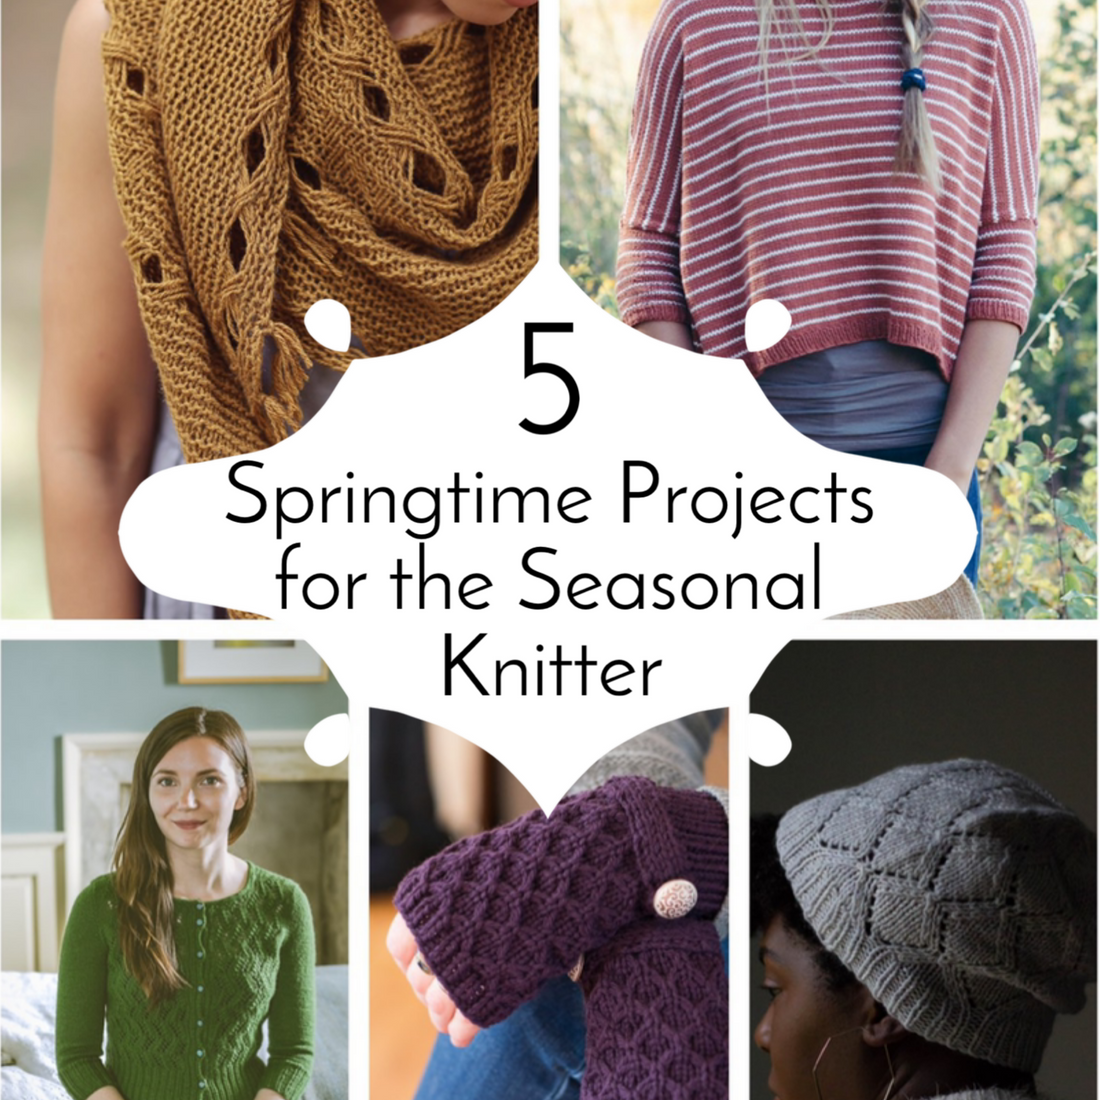 Five Springtime Projects for the Seasonal Knitter